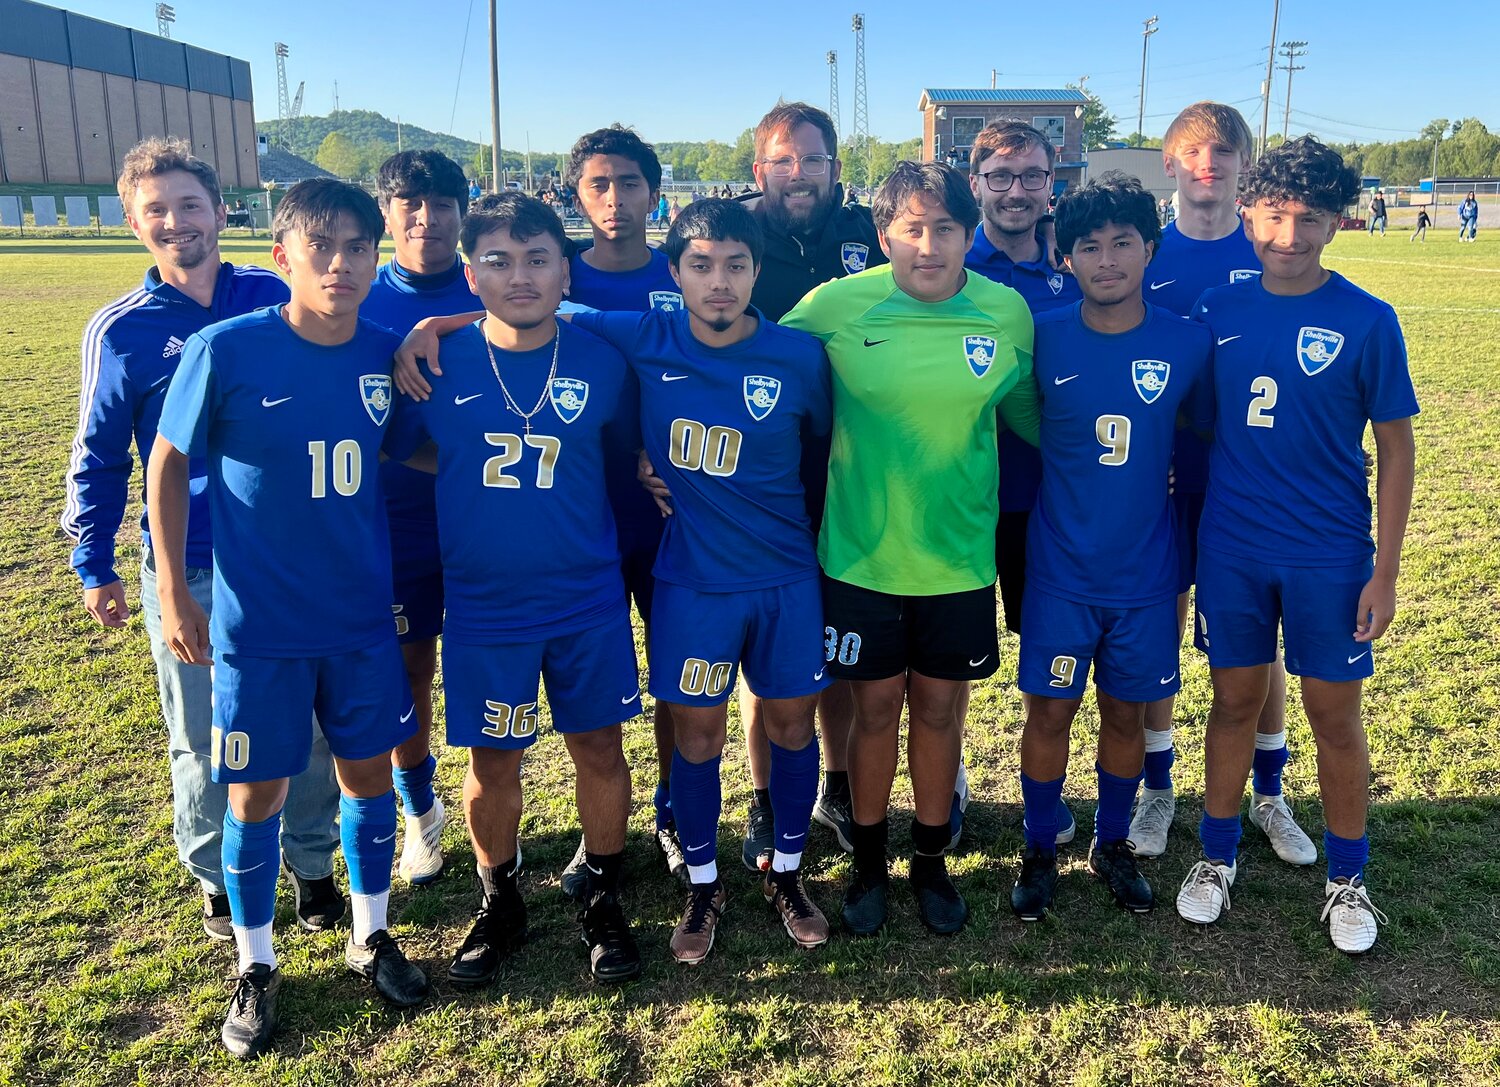 Seniors were honored before the Shelbyville Central game on Tuesday evening. Those seniors are (front, from left) Yahir Cervantes, Matthew Lopez, Gonzo Chamorro, Jonathan Rojas,  Arnold Avila and Brandon Cruz; (Back, from left) Eric Botello (Coach), Jonathan Medel, Ryan Tacuba, Chris Fritz (Coach), Jamie Groves (Coach) and Jake Betzelberger.